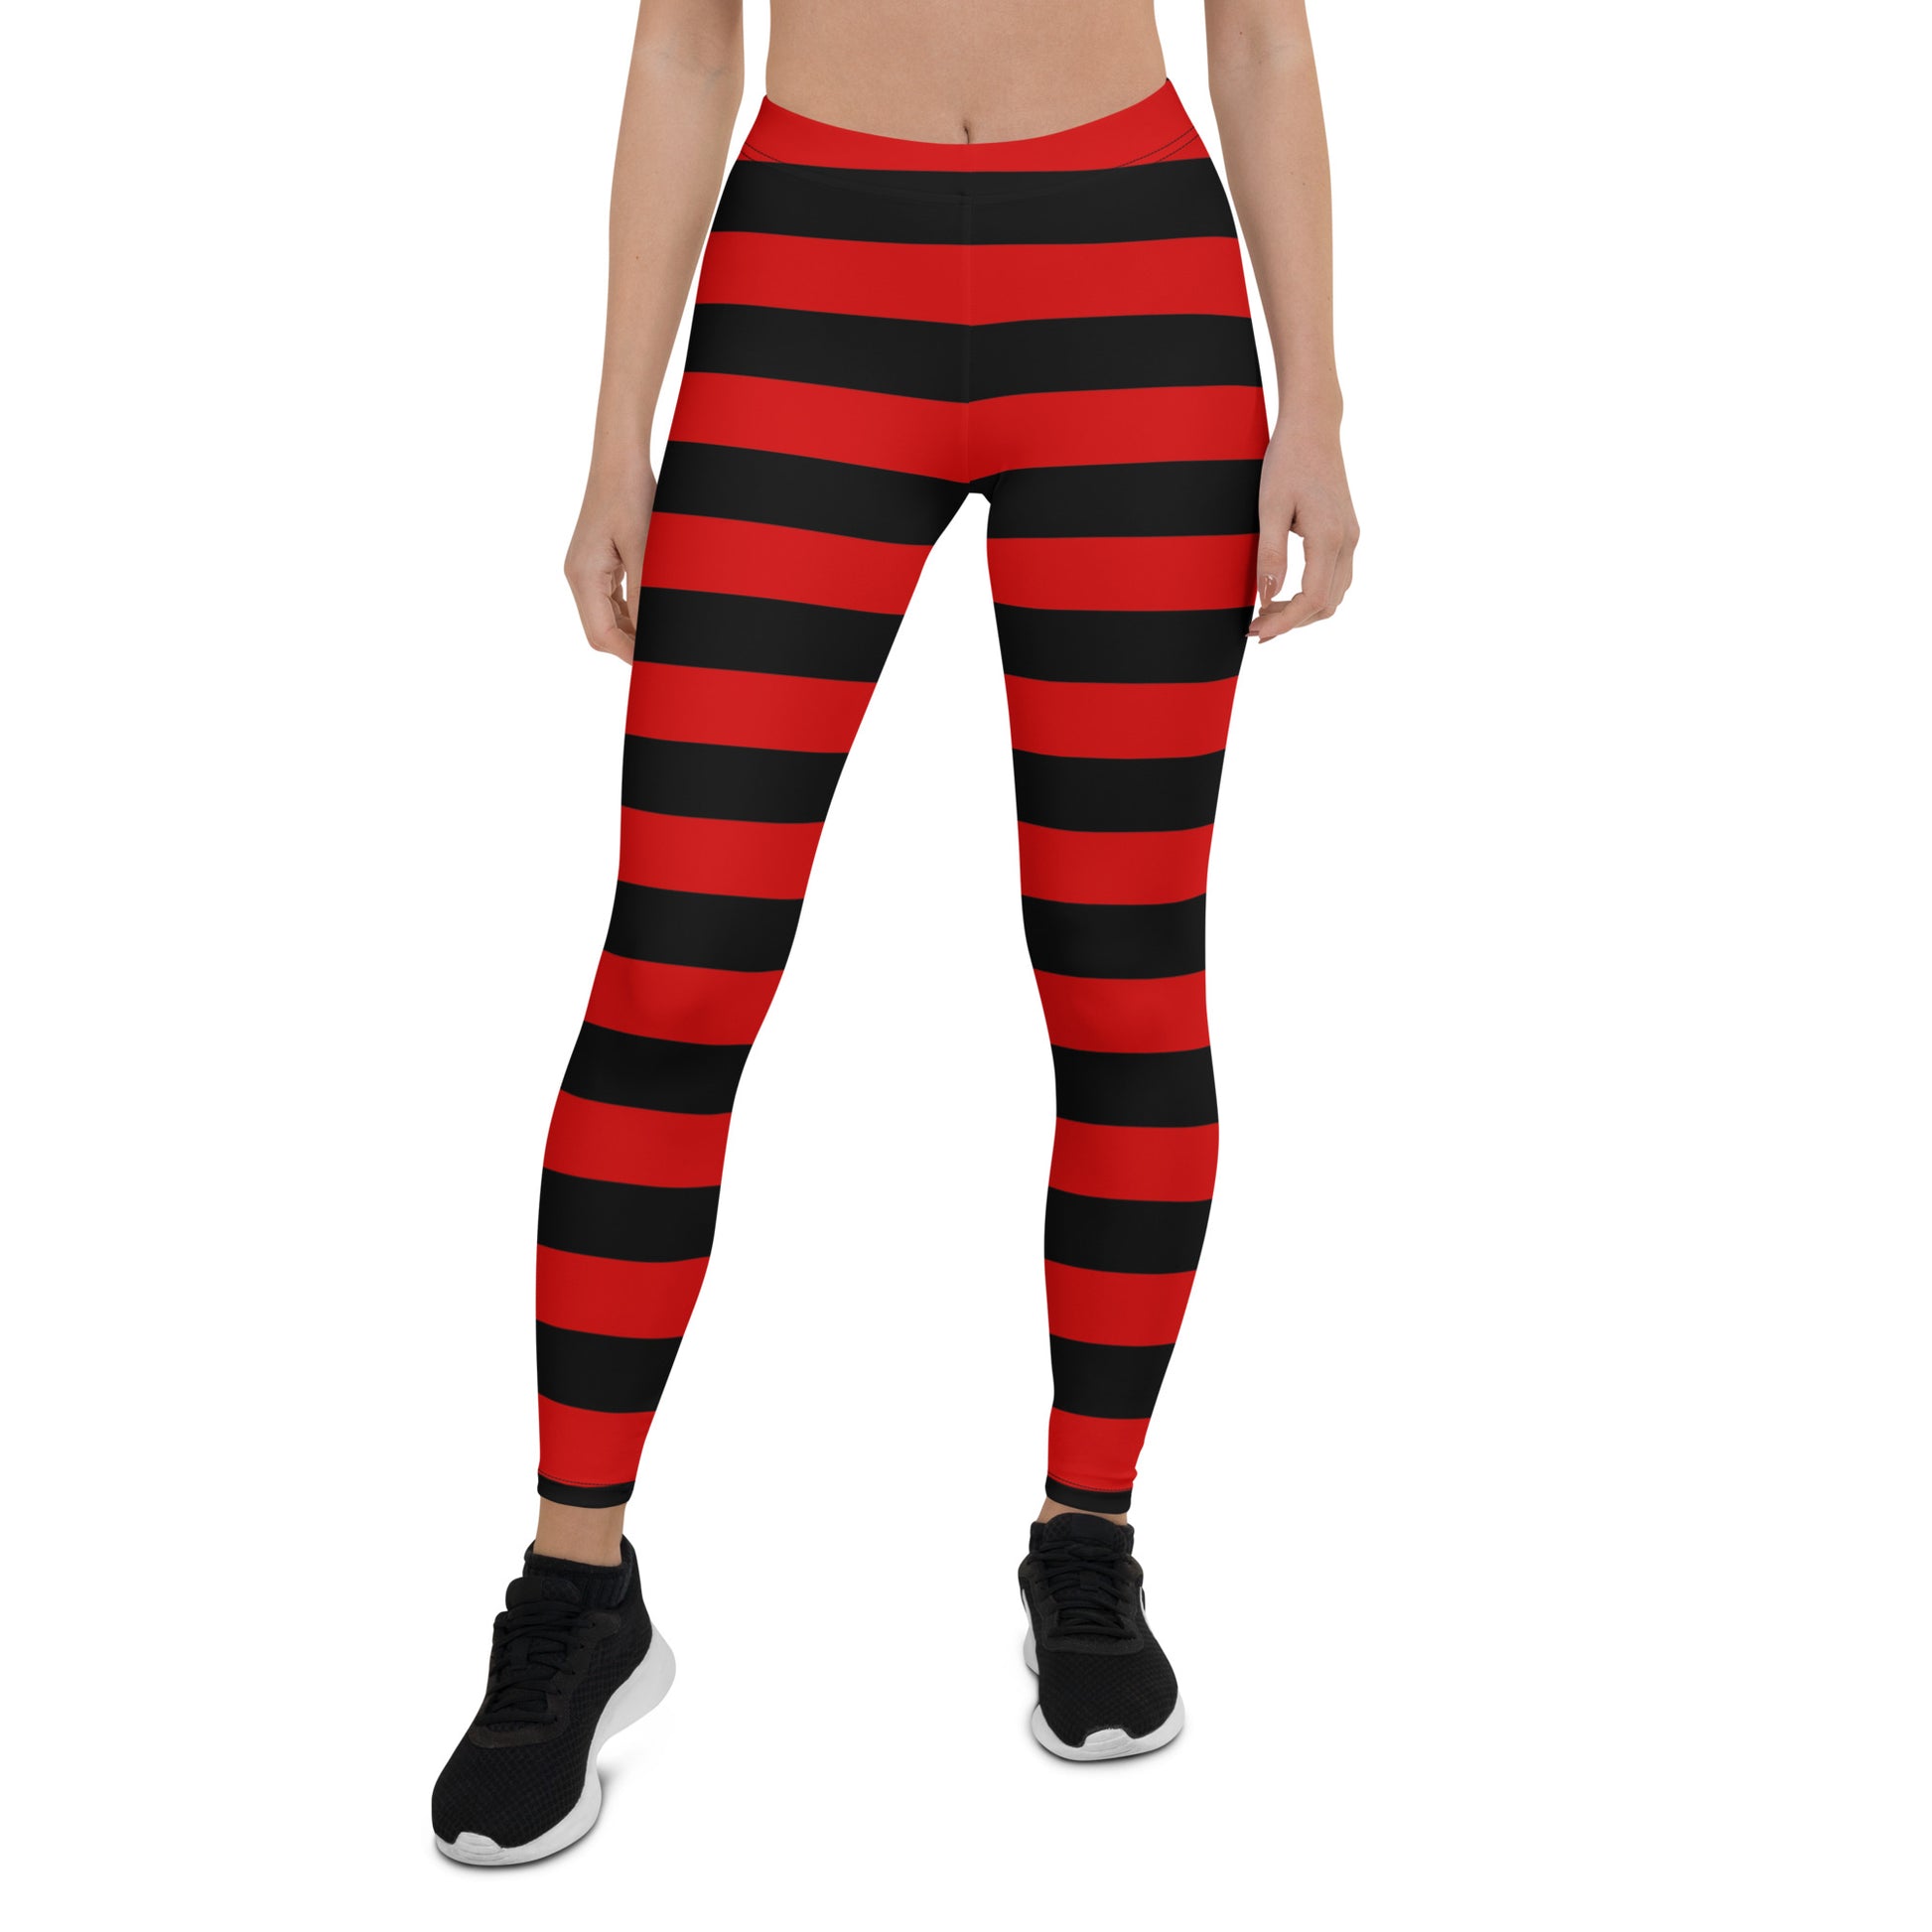 Witch Striped Pink Black Yoga Leggings Women Halloween Costume Pants  Activewear Capris Running Cosplay Party 